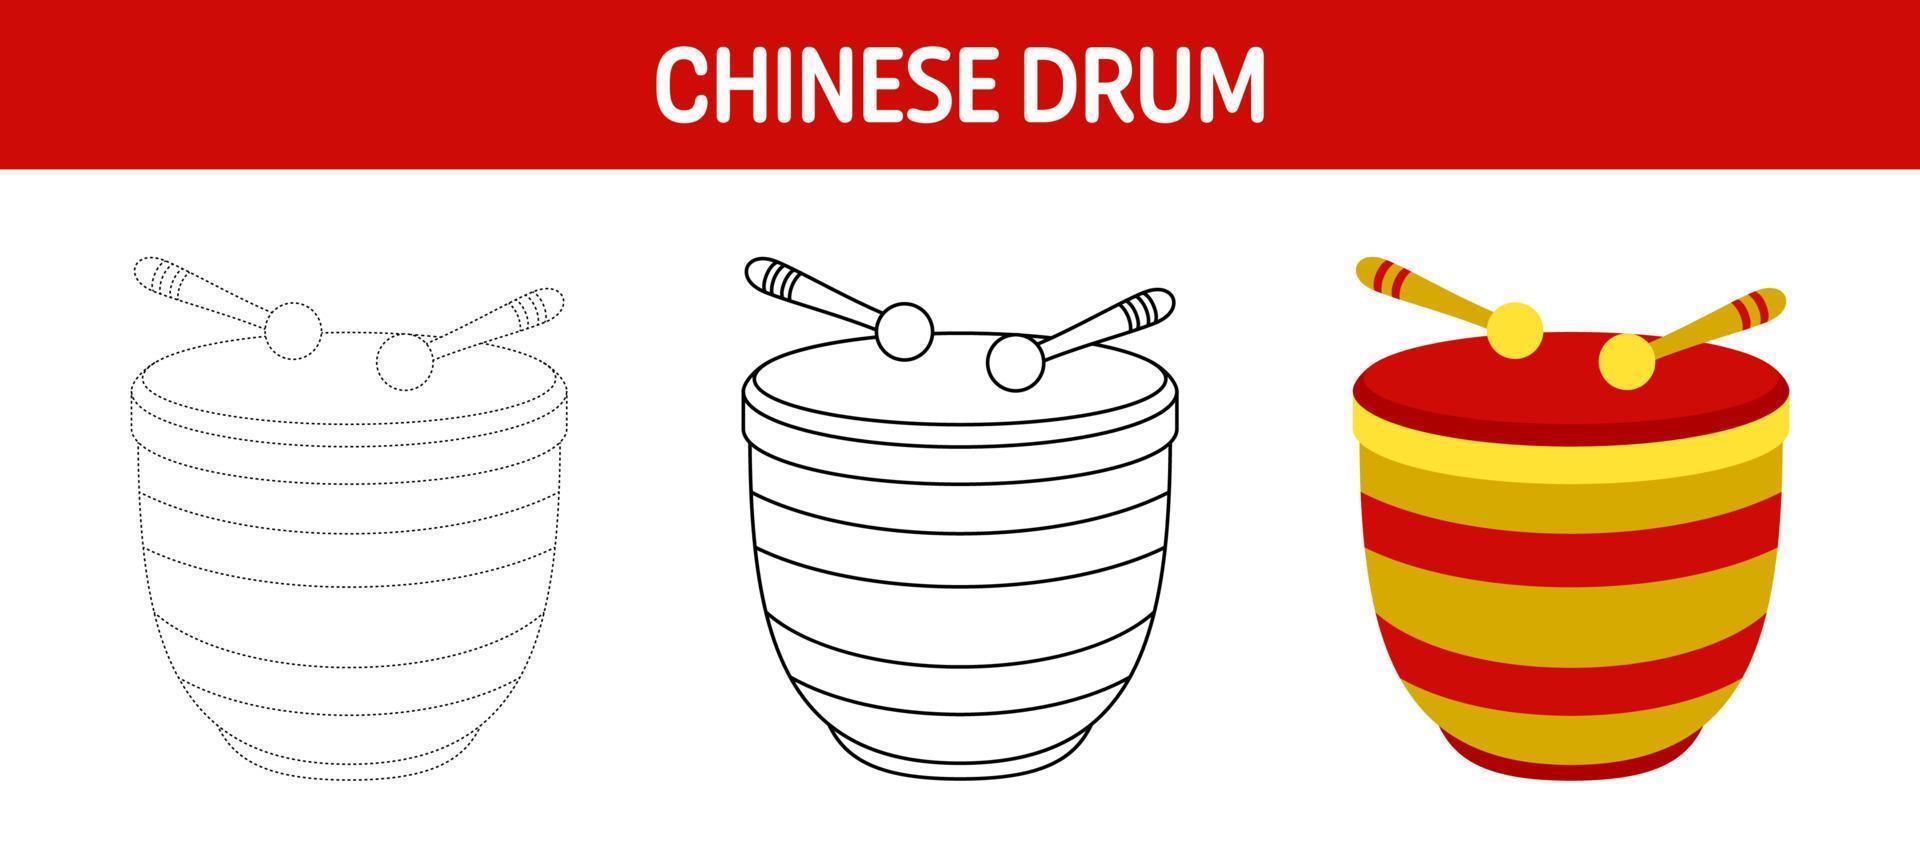 Chinese Drum tracing and coloring worksheet for kids vector